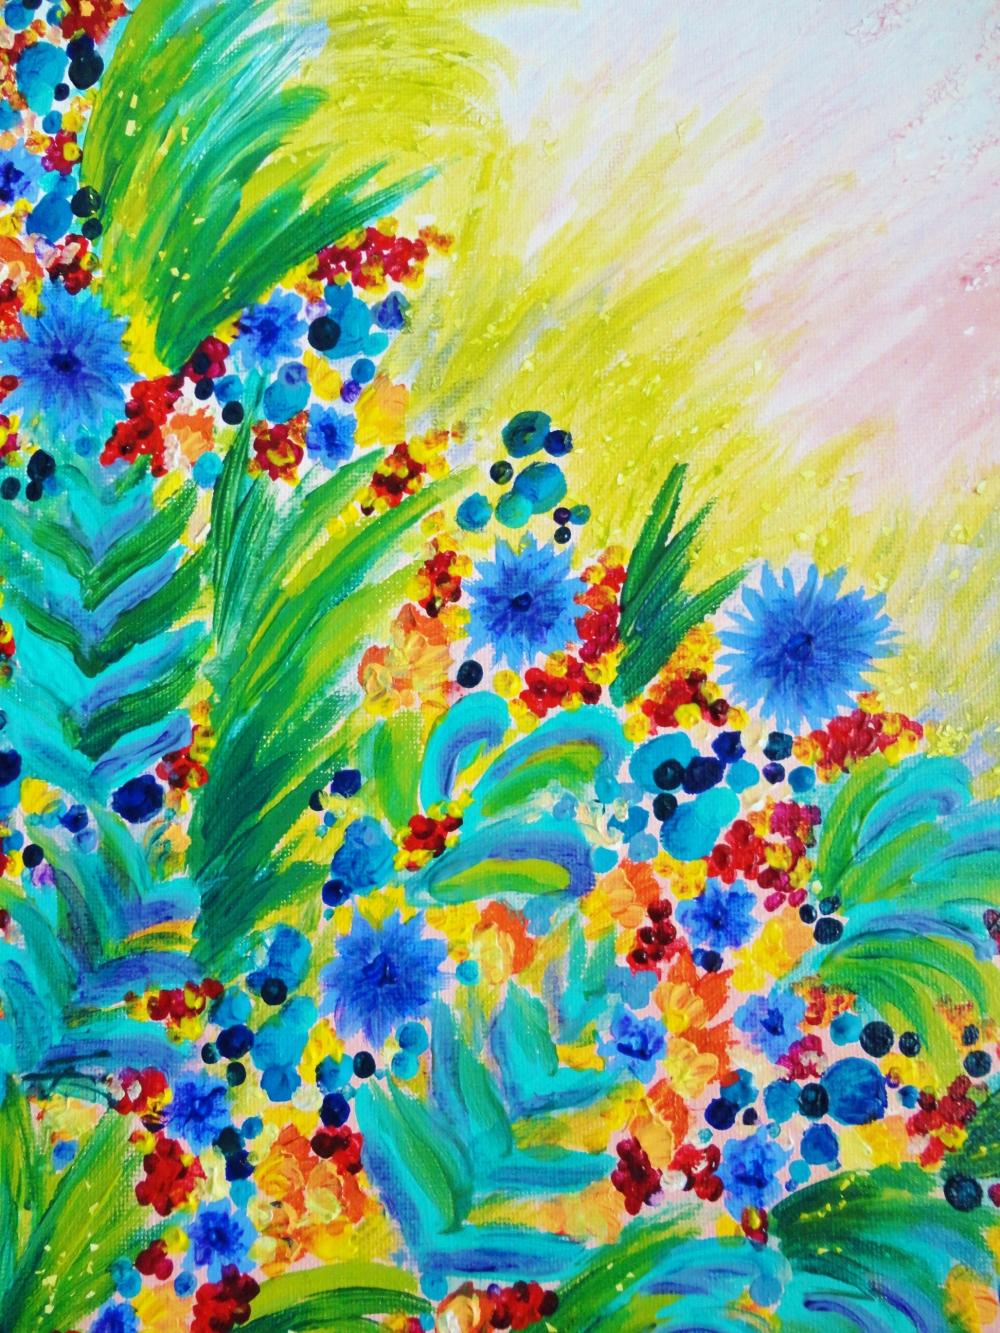 Beautiful Original Floral Painting, FREE SHIPPING 11 x 14 Bright Bold Rainbow Colorful Flowers Gift Under 100 For Her Christmas 2012